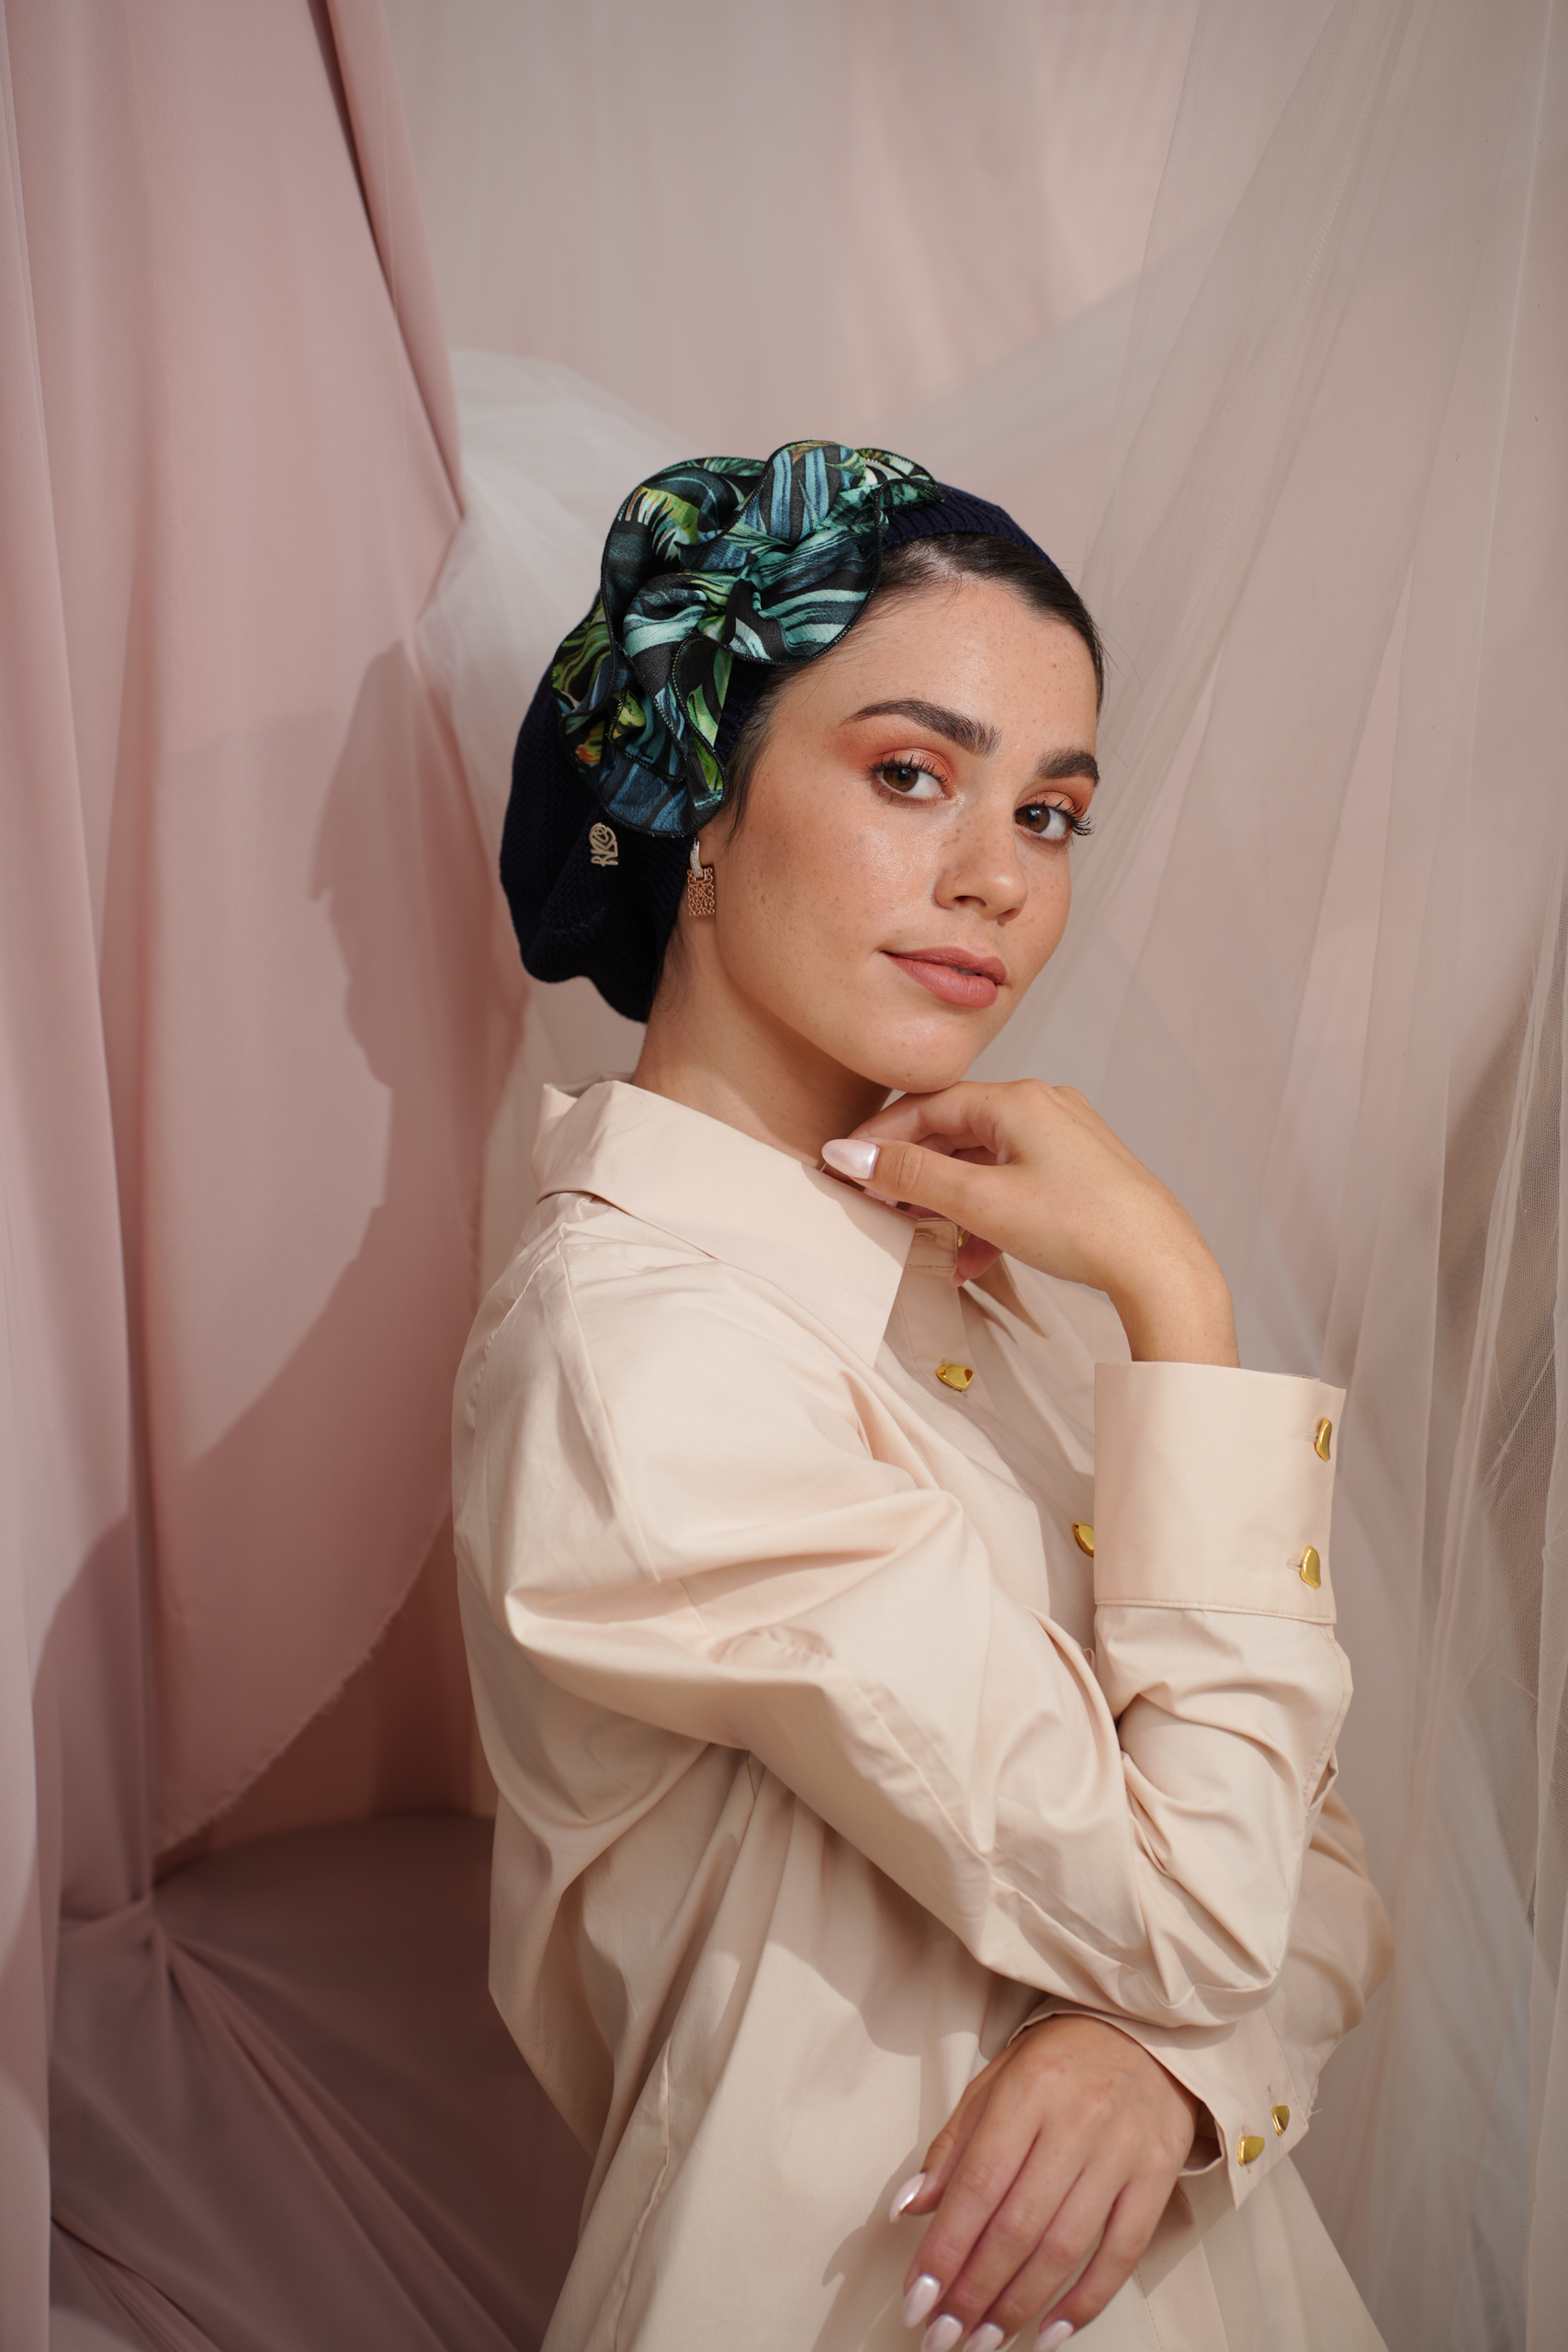 Blue Beret with Green Flower